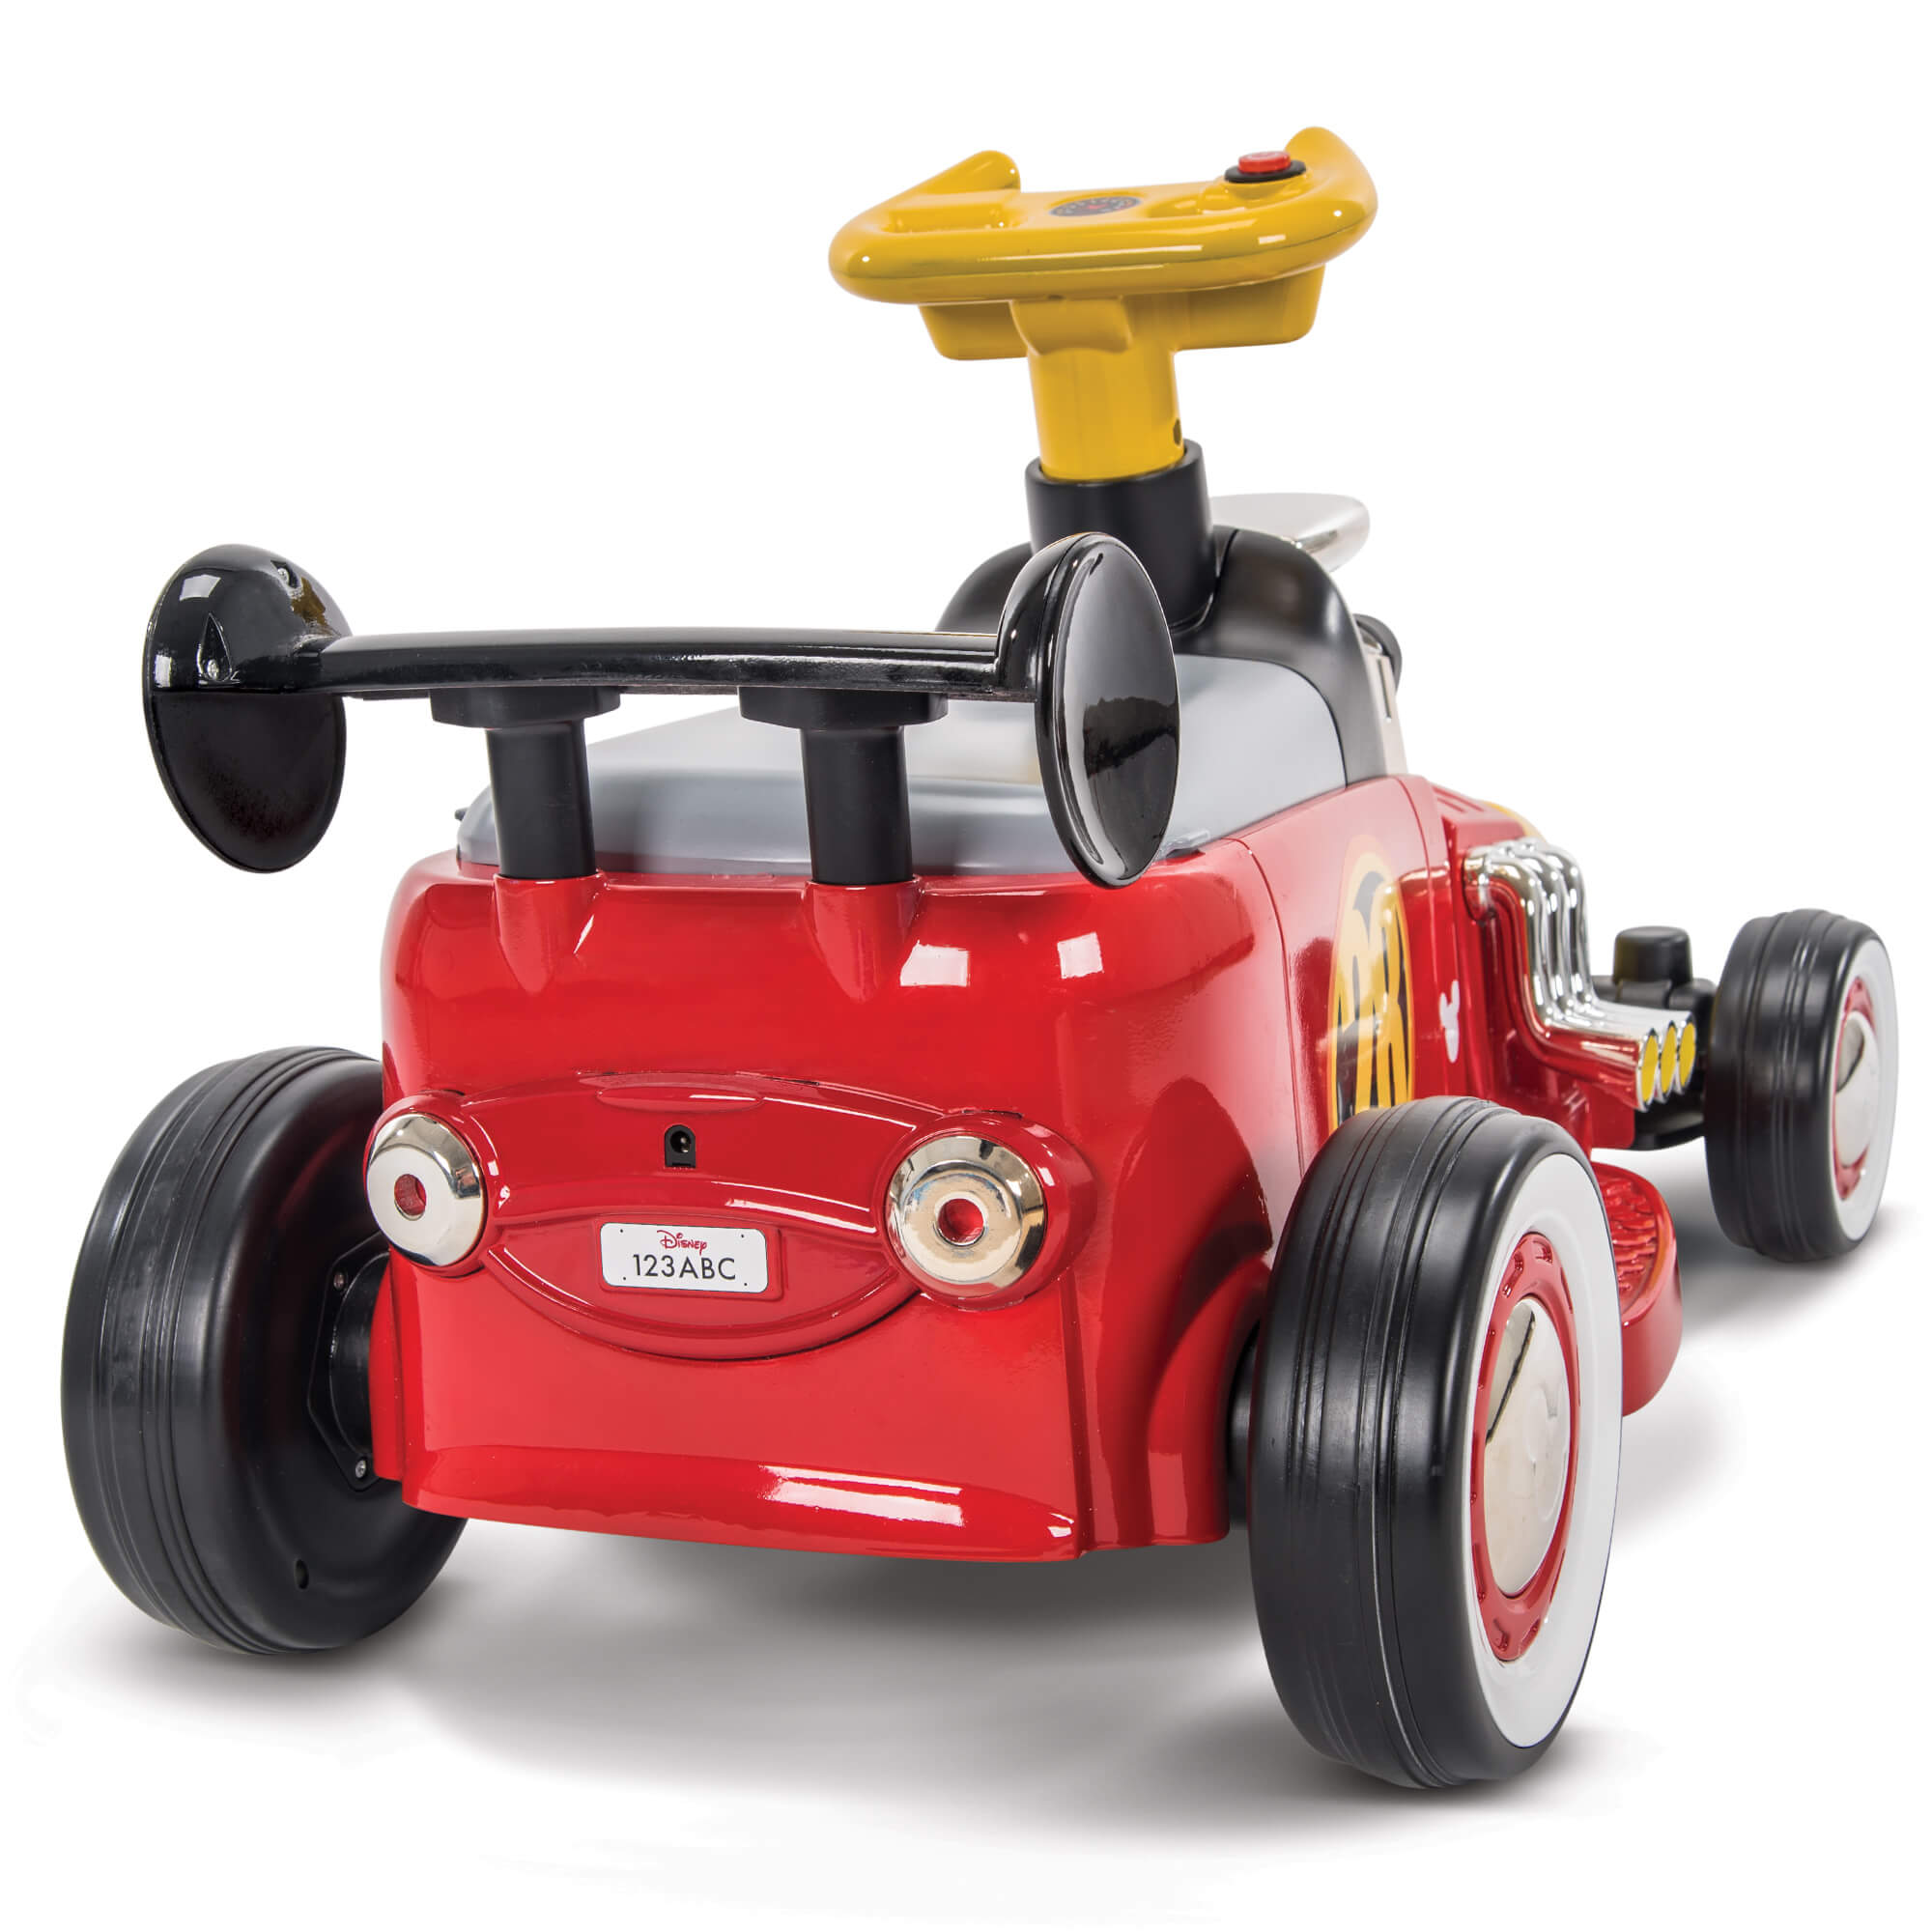 Disney Mickey Boys’ 6V Battery-Powered Ride-On Quad by Huffy - image 4 of 11